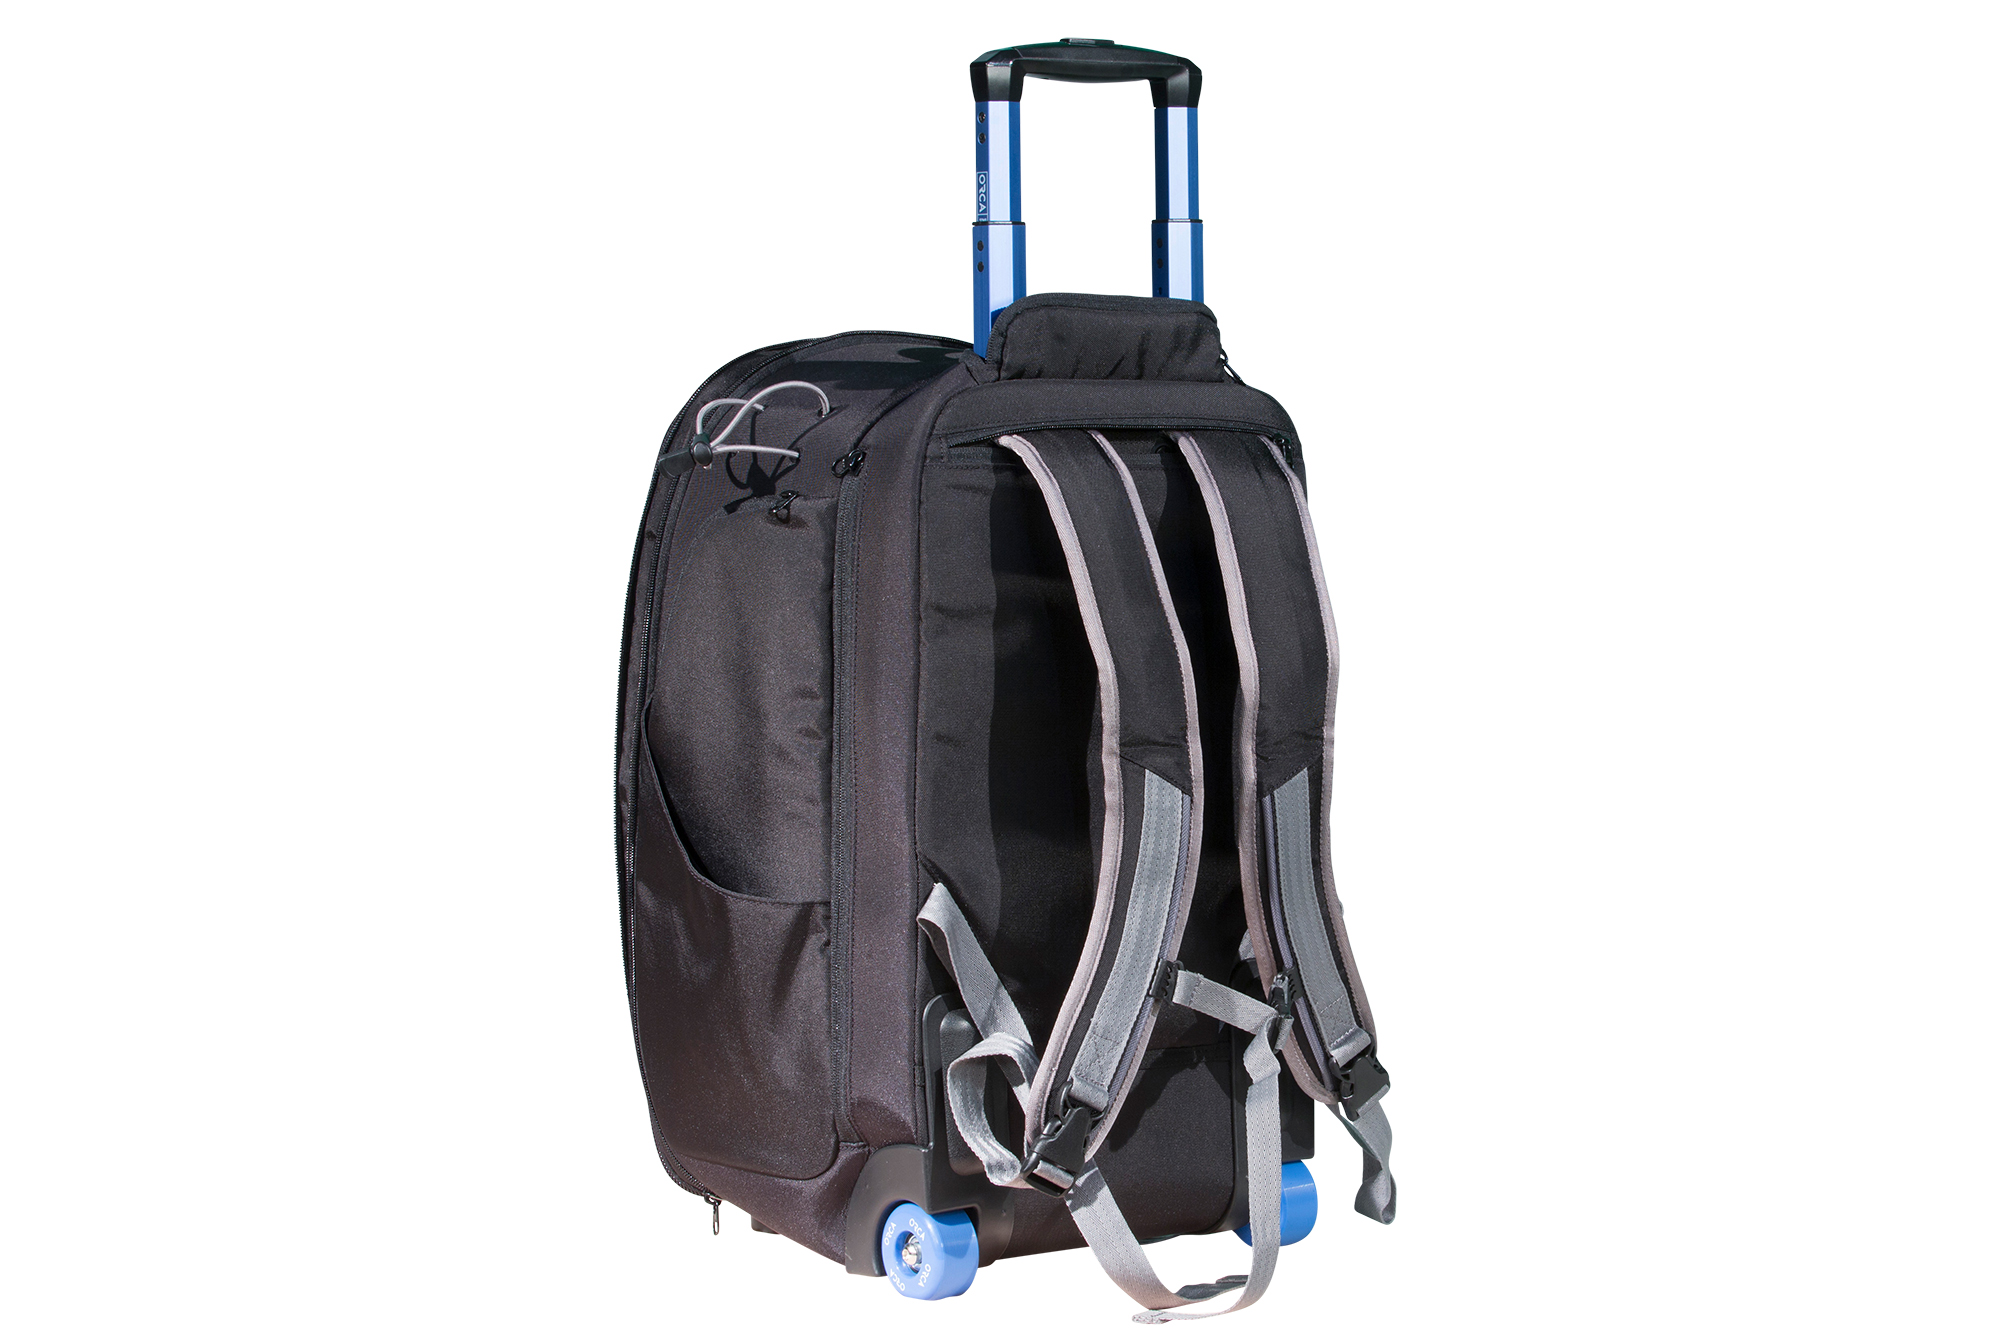 Orca OR-26 Camera Backpack with Built In Trolley